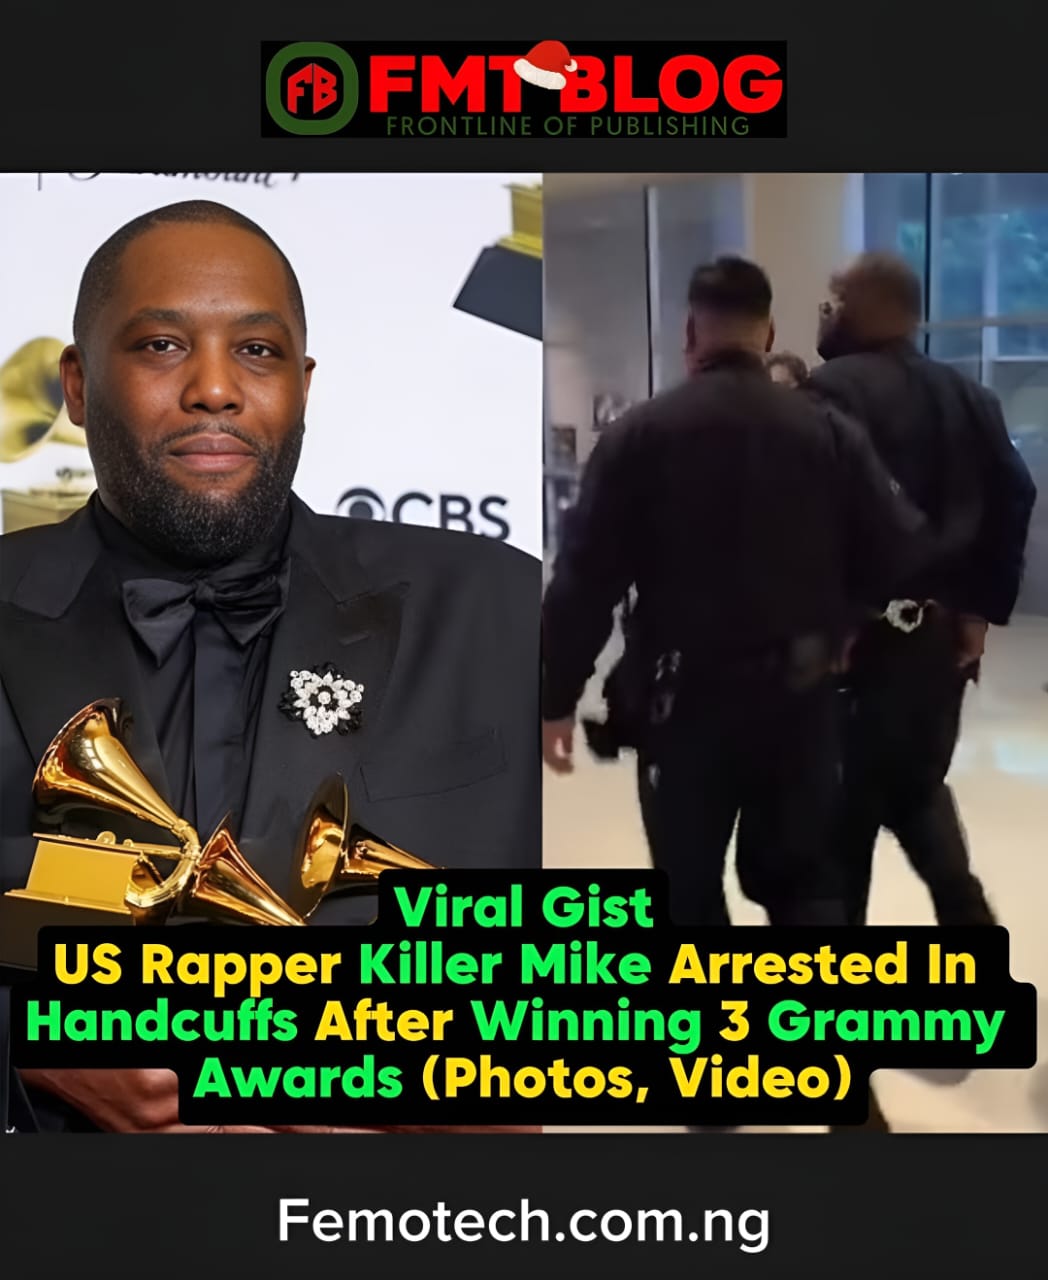 US Rapper Killer Mike Arrested In Handcuffs After Winning 3 Grammy Awards (PHOTOS, VIDEO)